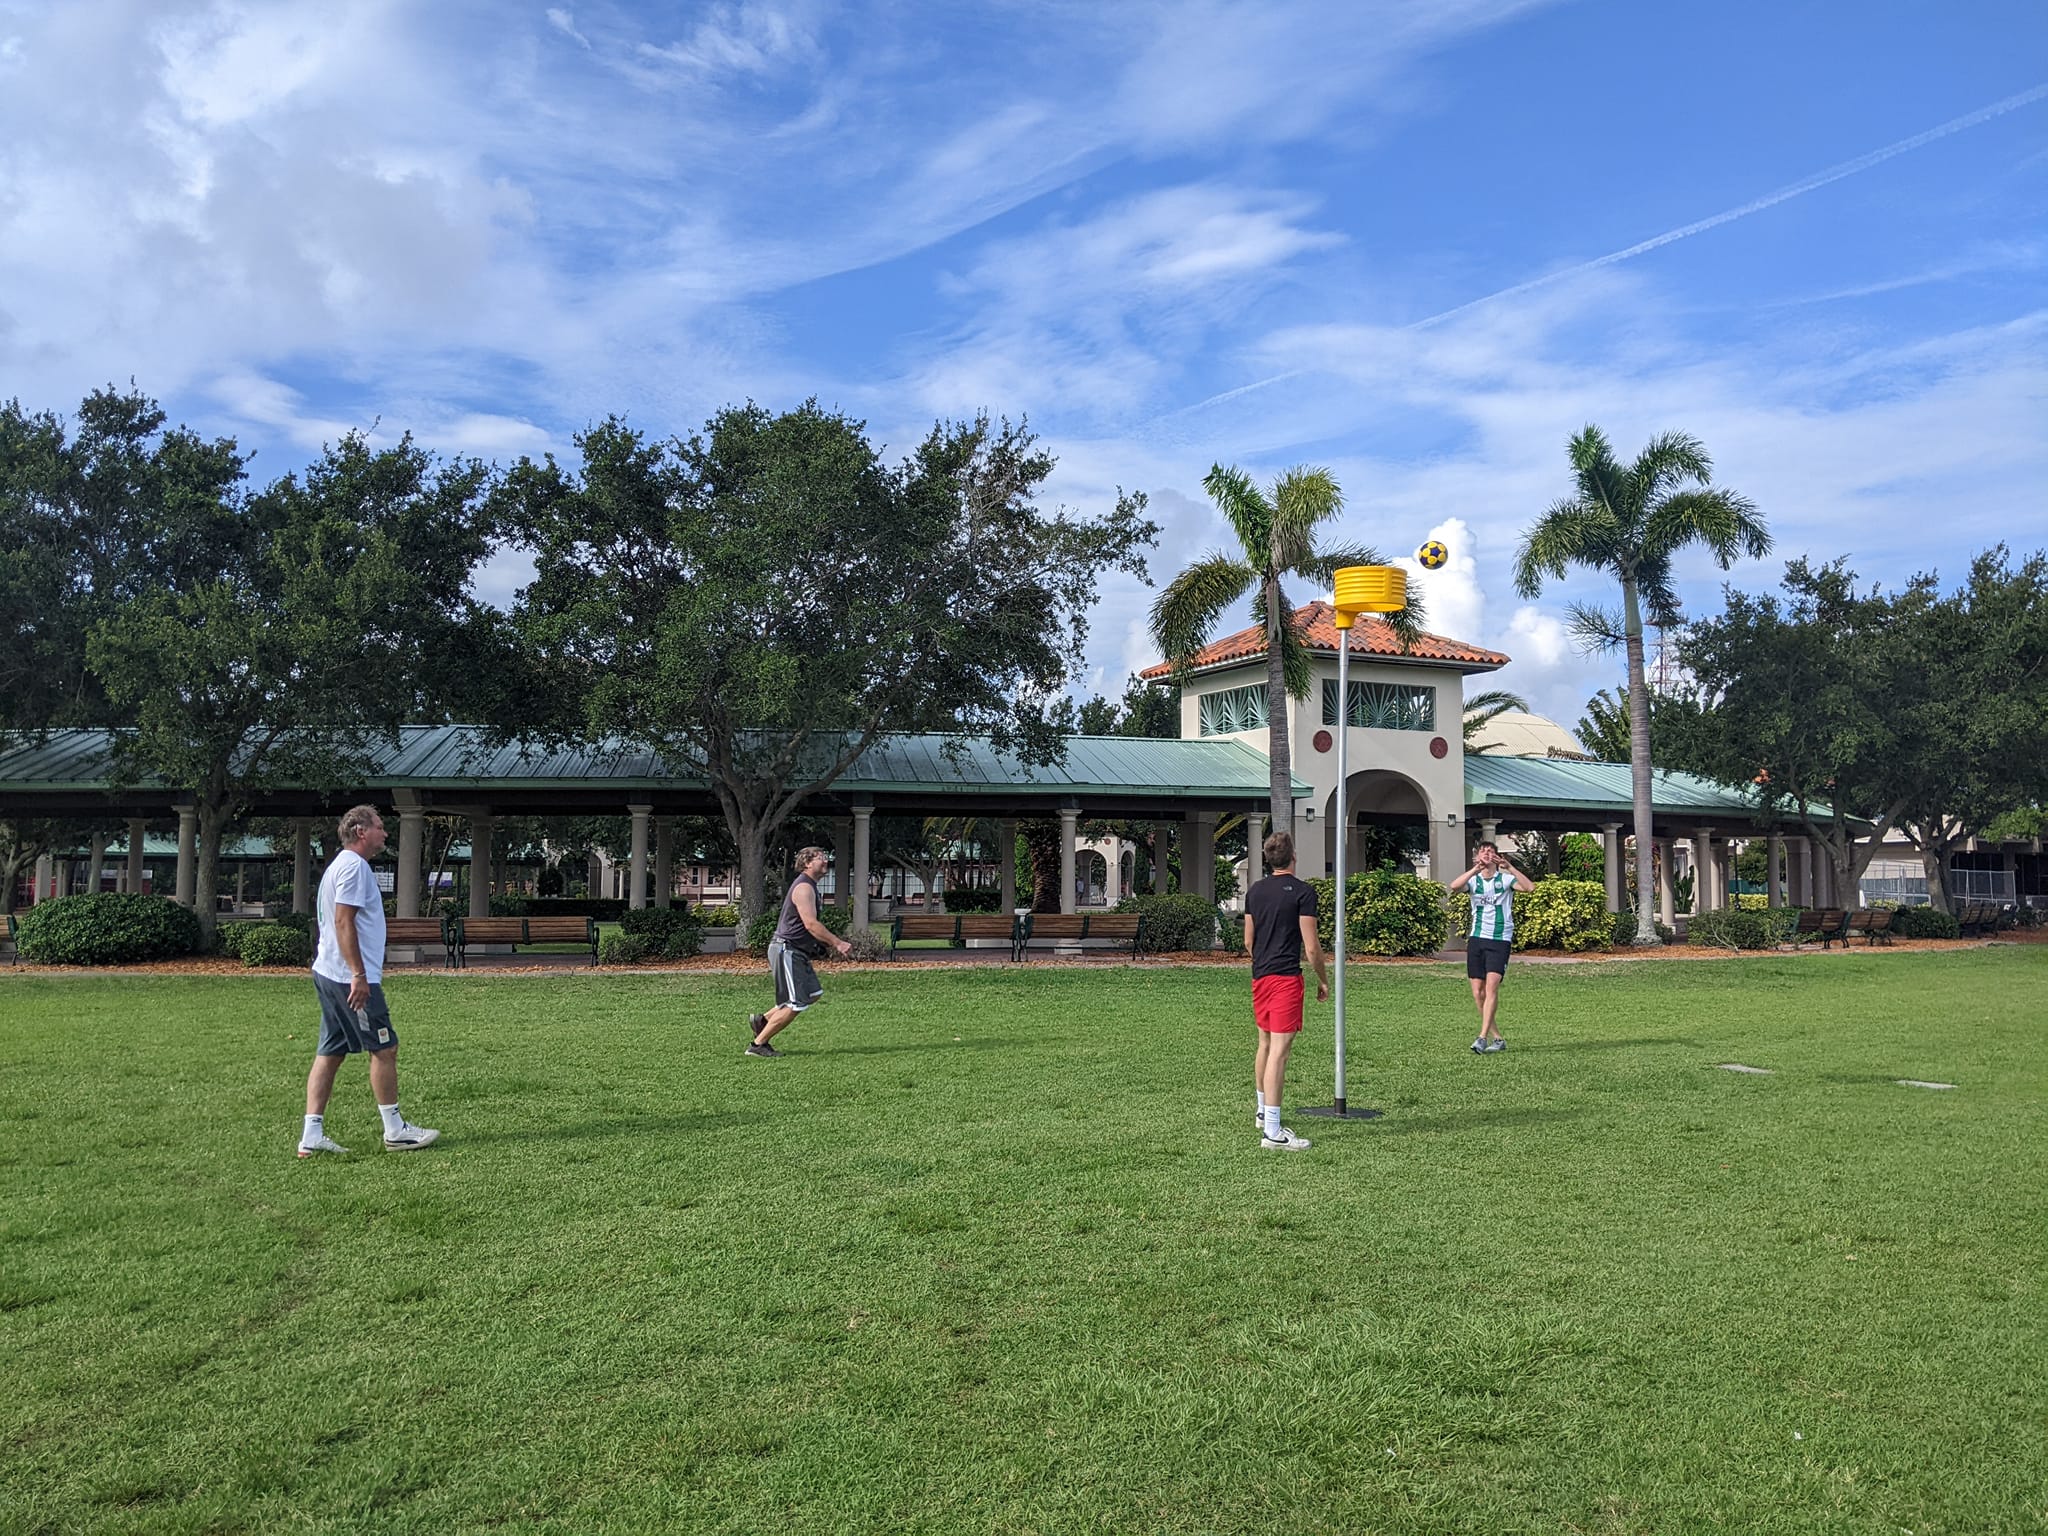 Korfball basket and players in a Florida park with palm trees